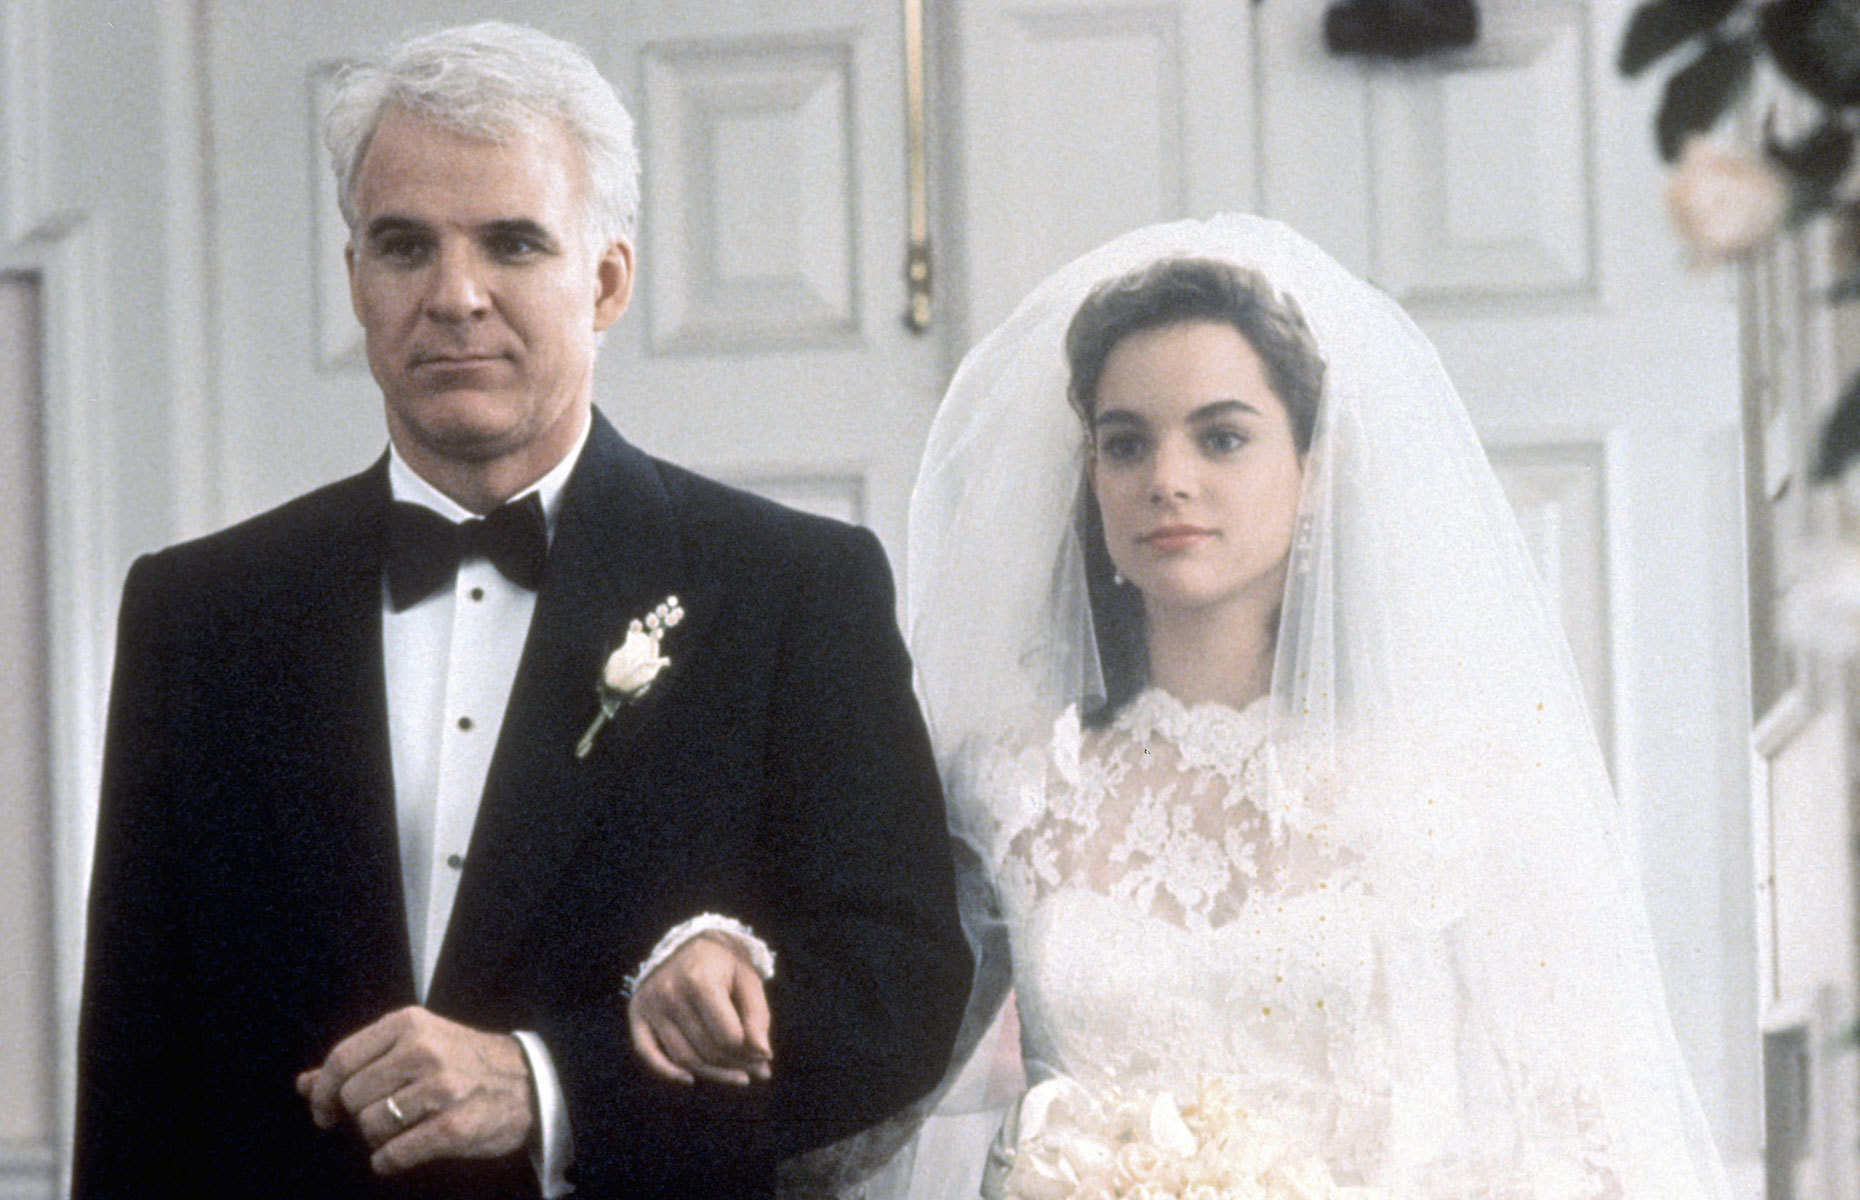 <p>Steve Martin is at his curmudgeonly best as an exasperated dad helplessly watching as his daughter gets married in this winsome wedding movie (a remake of the 1950 version starring Spencer Tracy and Liz Taylor). Martin Short has a star turn playing incomprehensible and flamboyant wedding planner Franck, who was <a href="https://www.bustle.com/p/lisa-vanderpumps-party-planner-kevin-lee-has-worked-with-oprah-winfrey-barack-obama-but-his-cocktail-conversation-could-use-some-work-8128386" rel="noreferrer noopener">actually based on real L.A. planner and reality star Kevin Lee</a>. And the ceremony itself is pure suburban ‘90s grandeur, swans and all.</p>